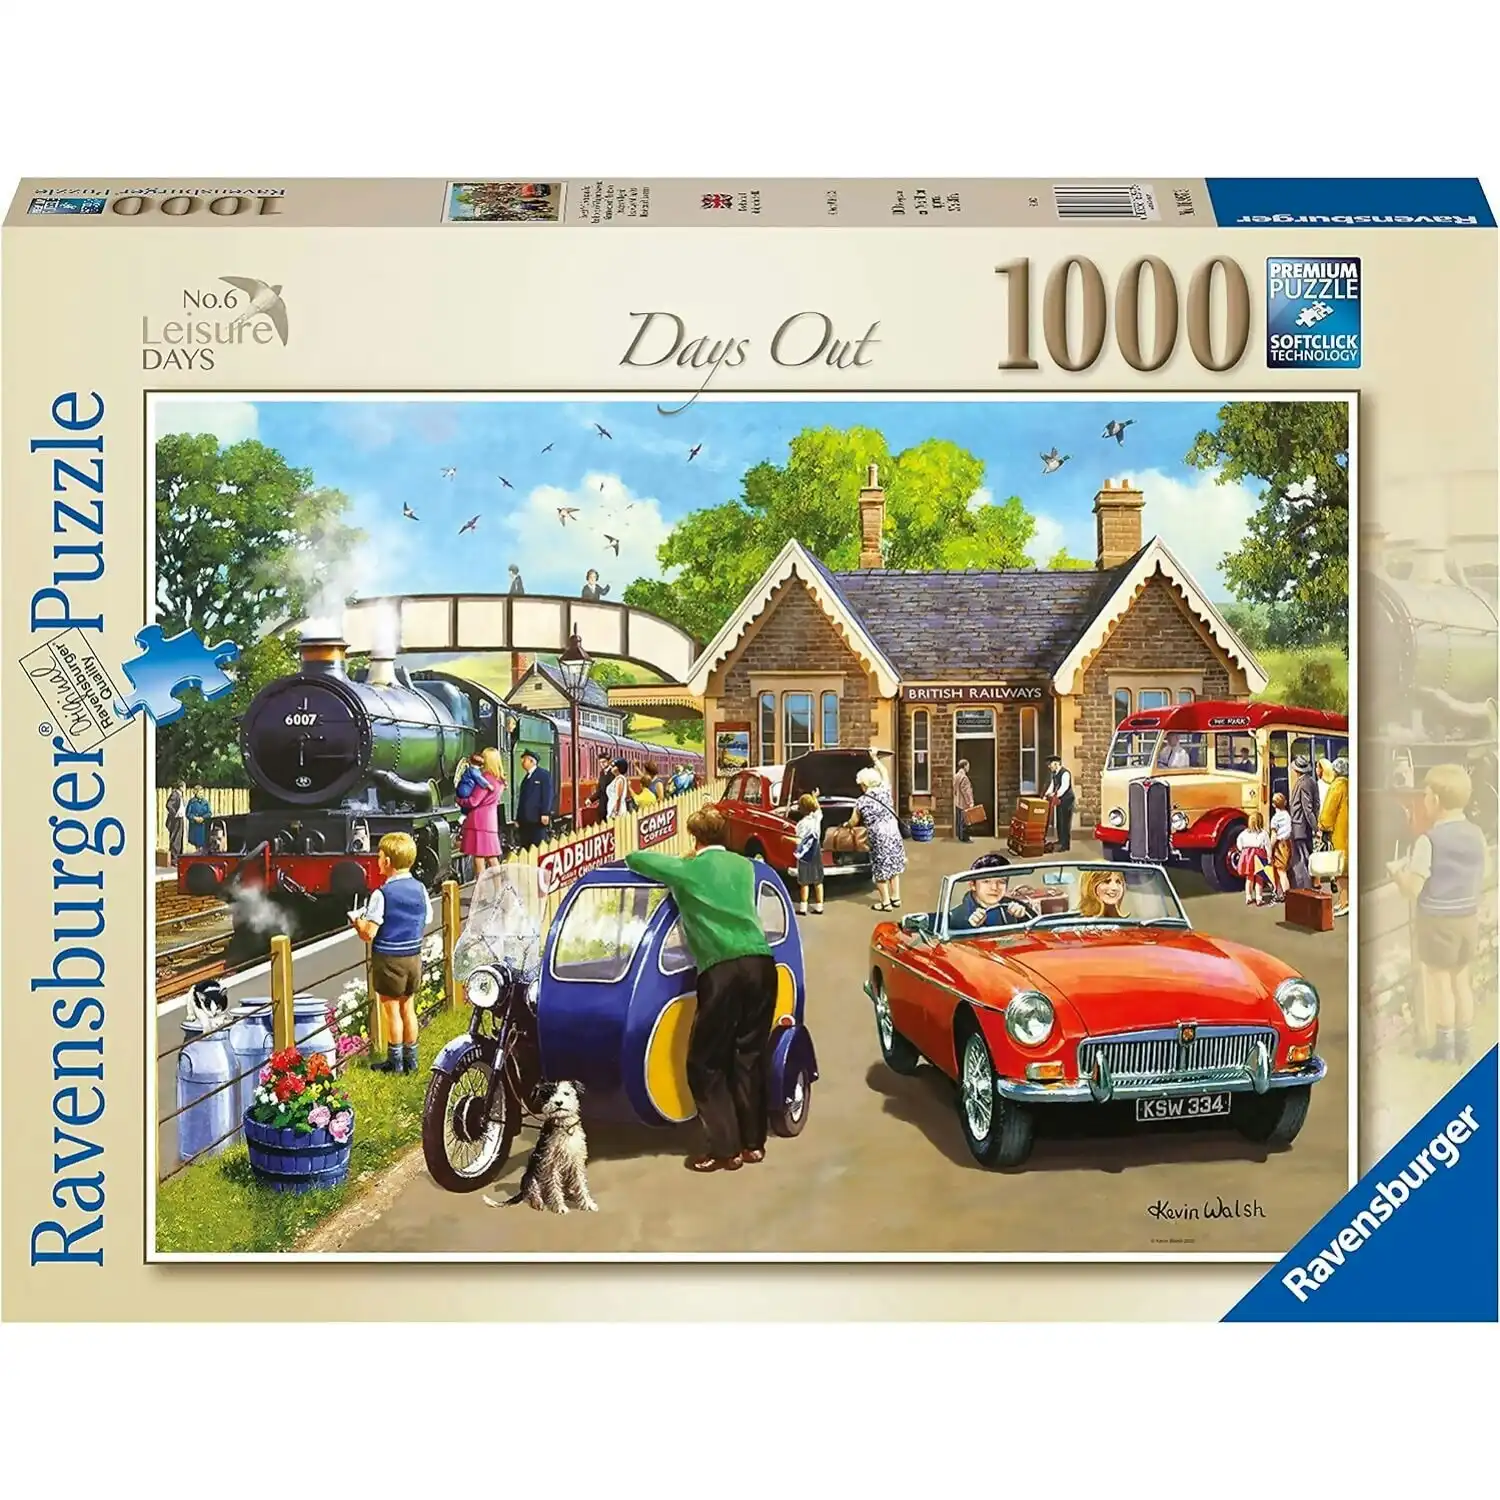 Ravensburger - Leisure Days No6 Days Out Jigsaw Puzzle 1000pc